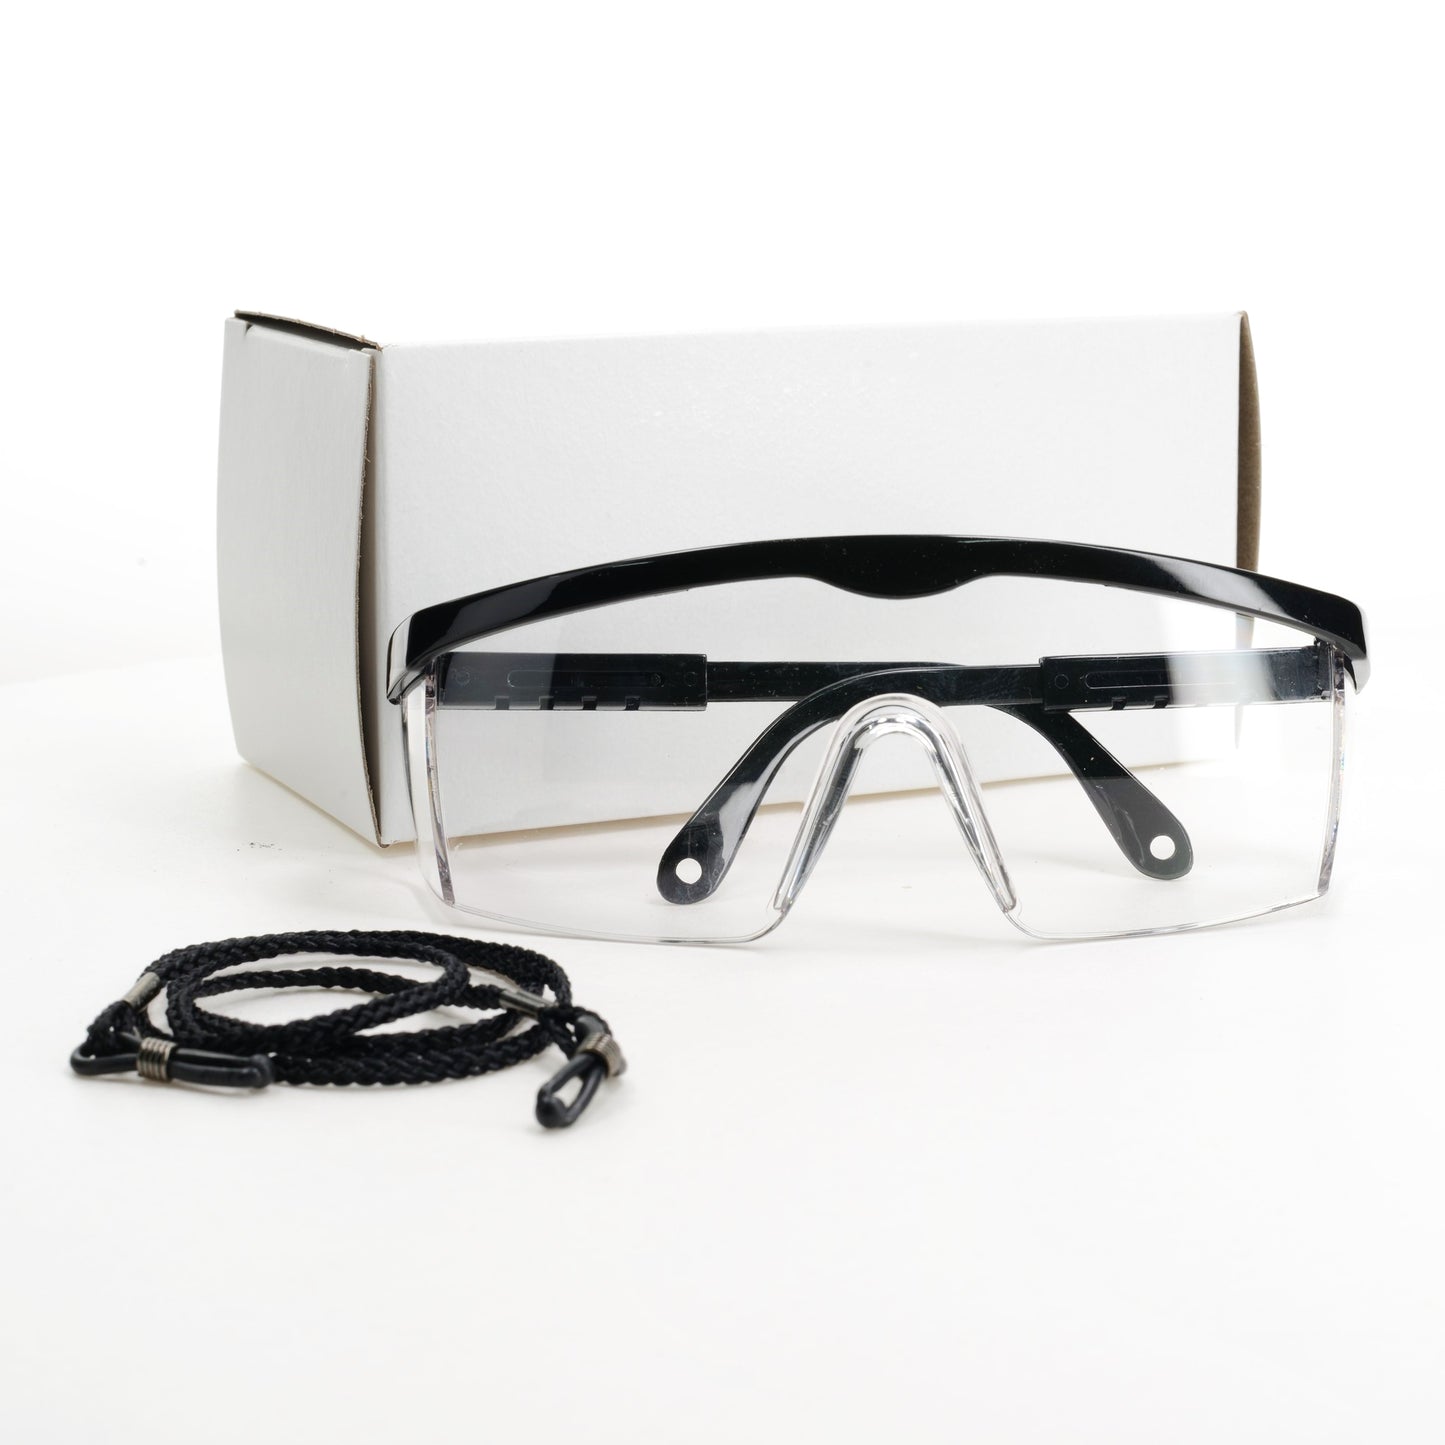 Safety Glasses displayed with box and neck cord